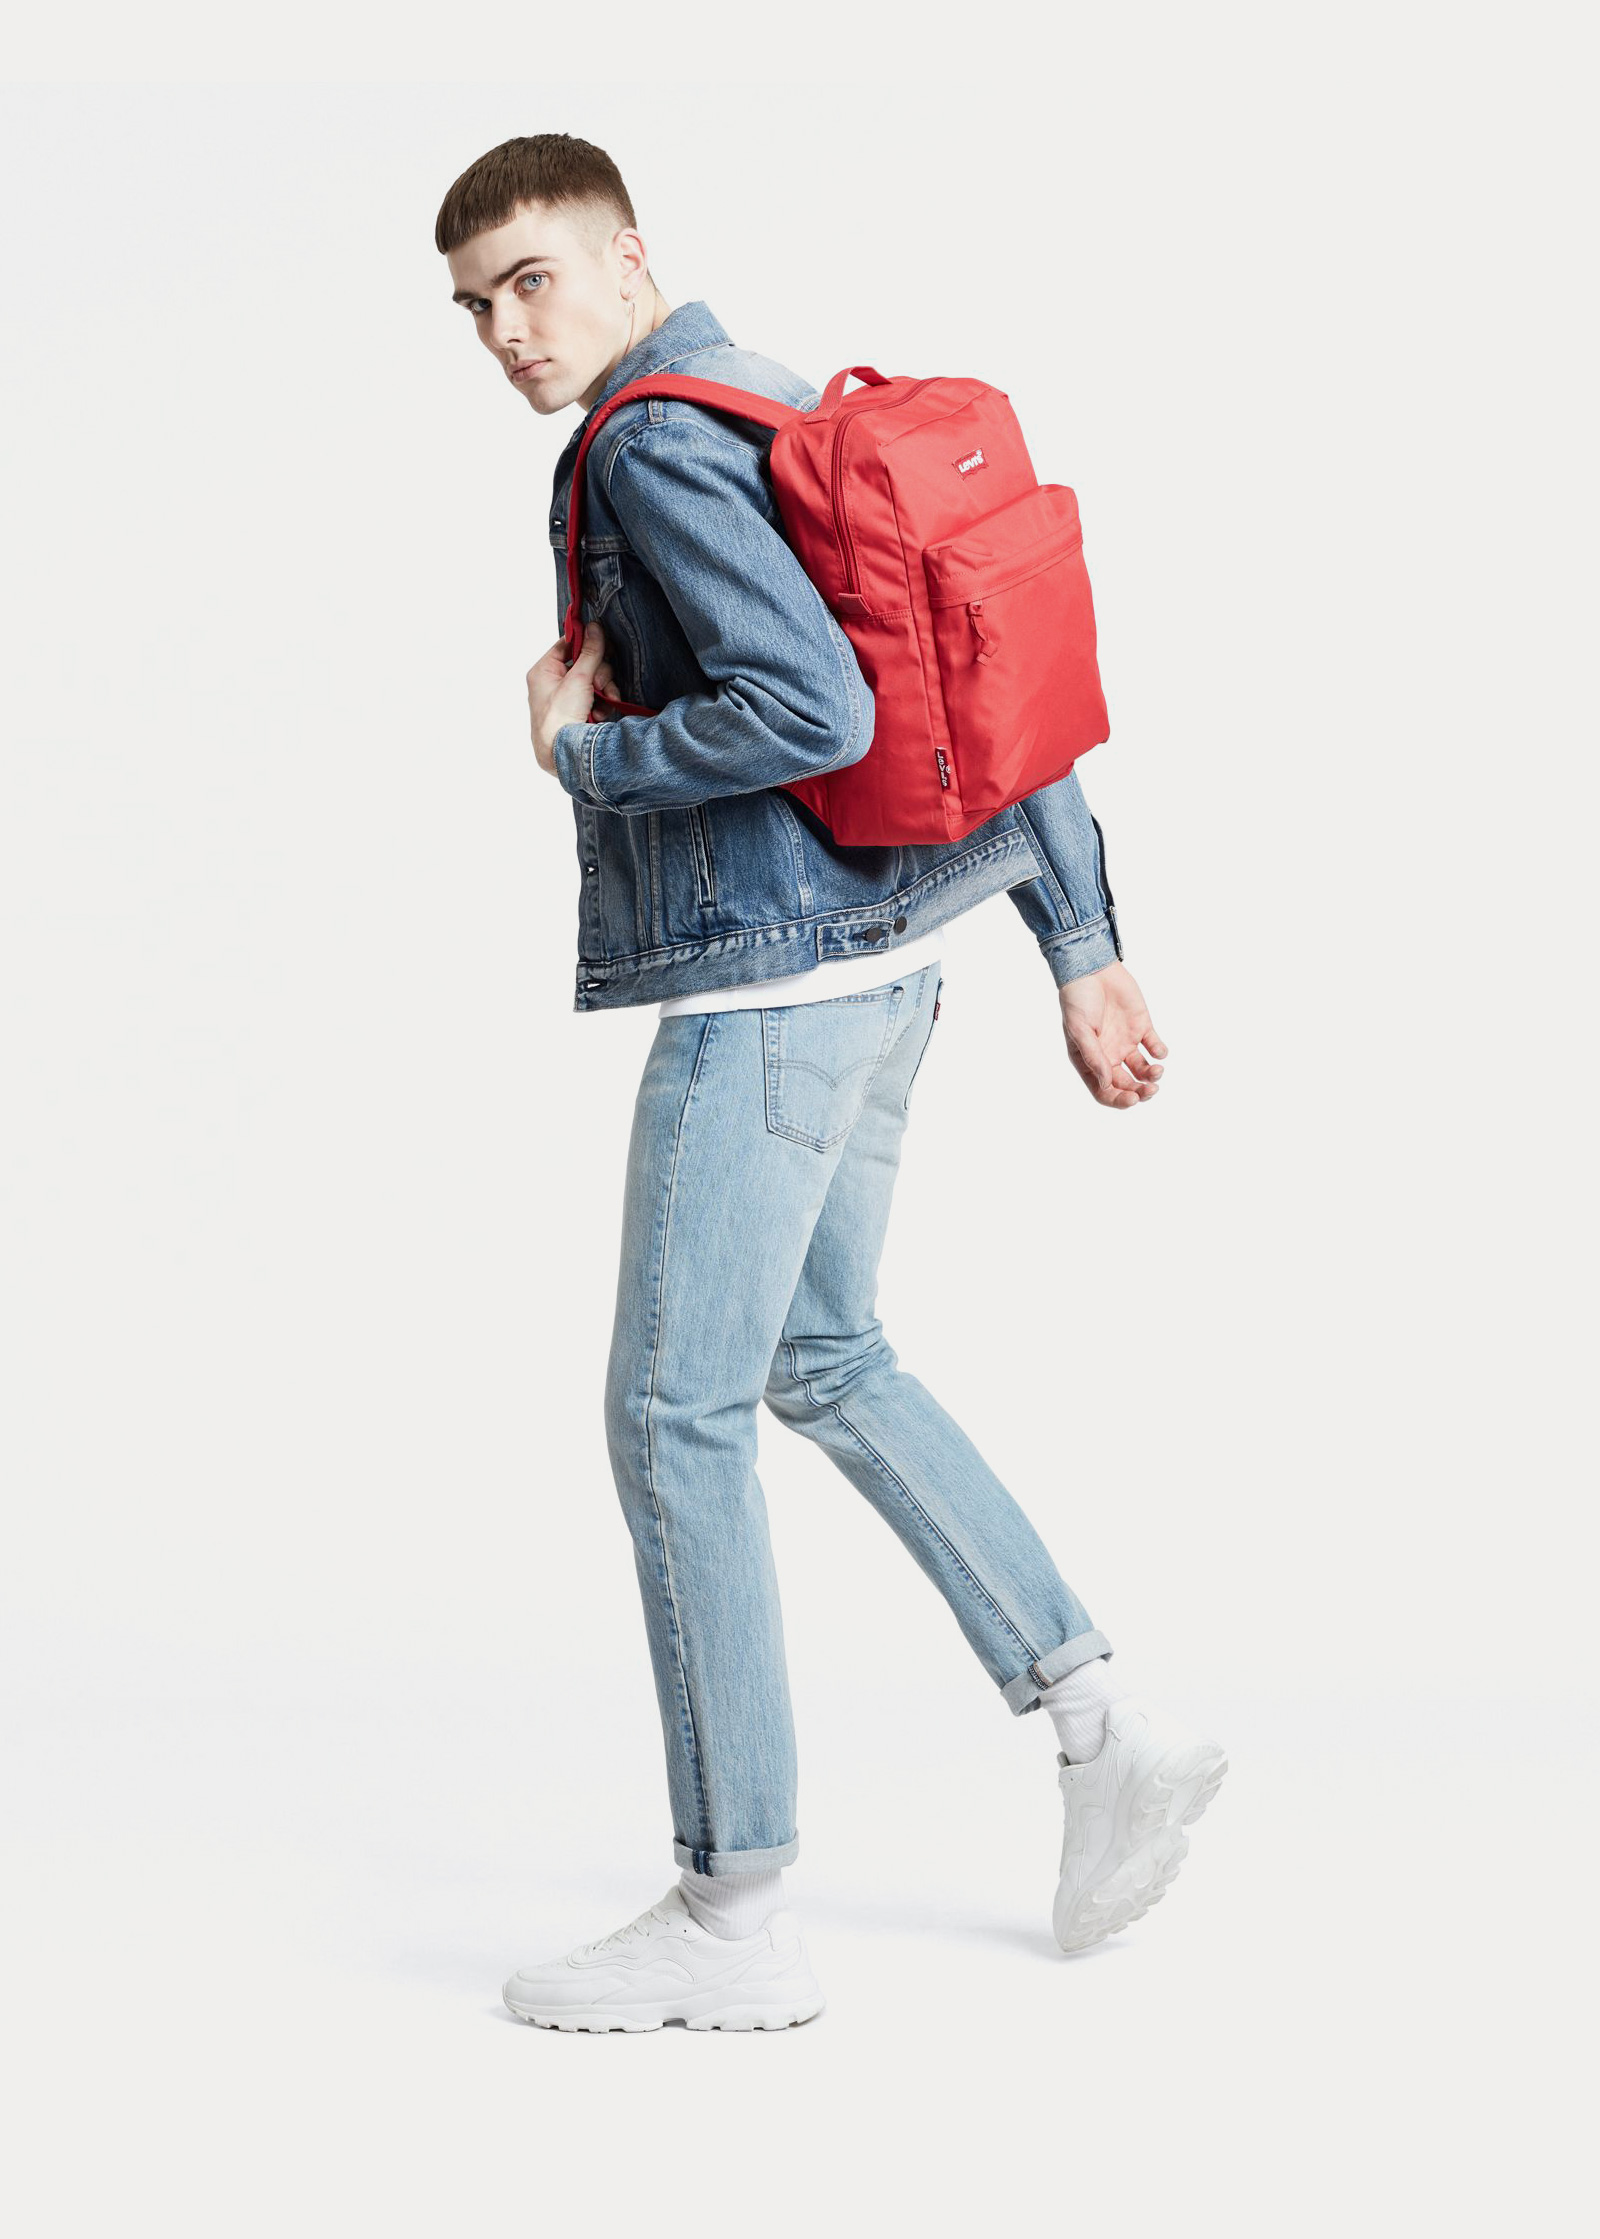 L Pack Standard Issue - Dull Red 